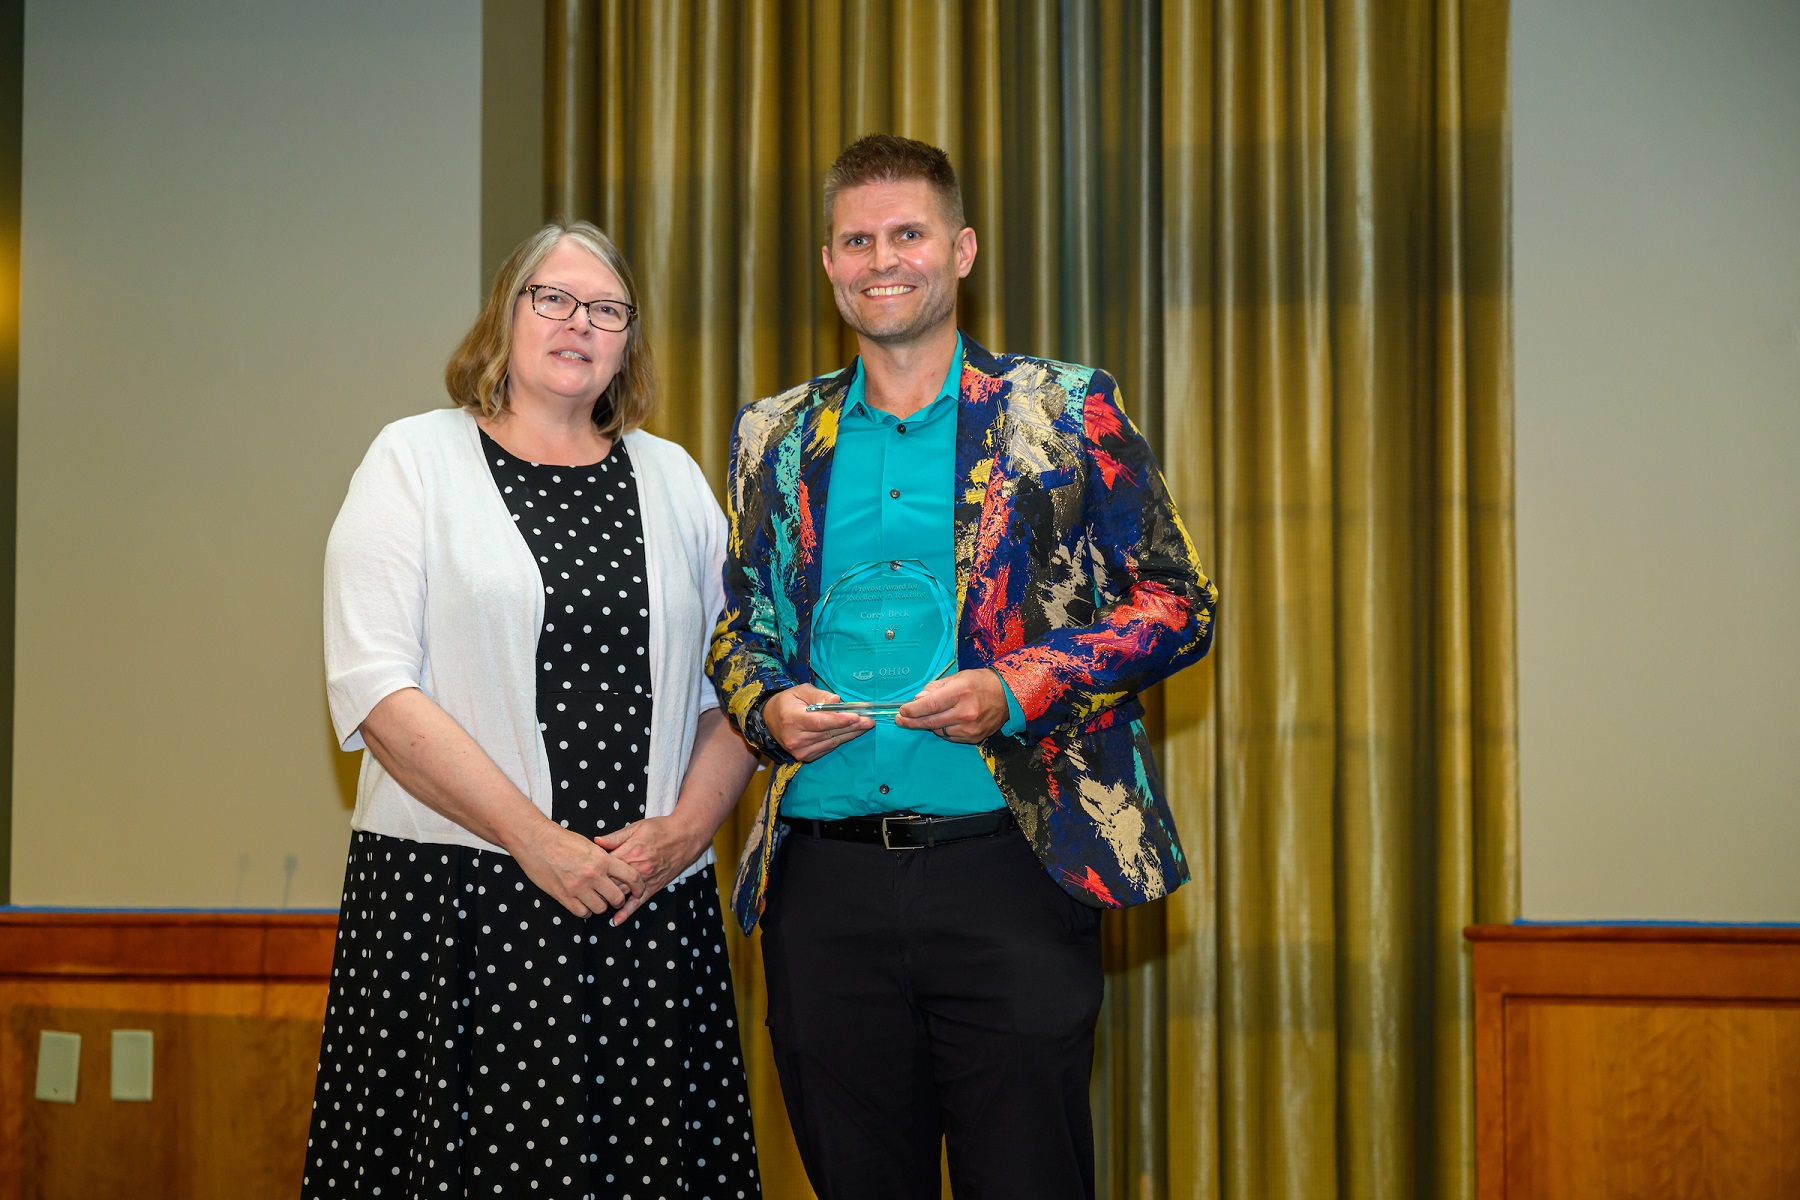 Image of Provost Dr. Elizabeth Sayrs and Dr. Corey Beck, holding the  Provost's Award for Excellence in Teaching.